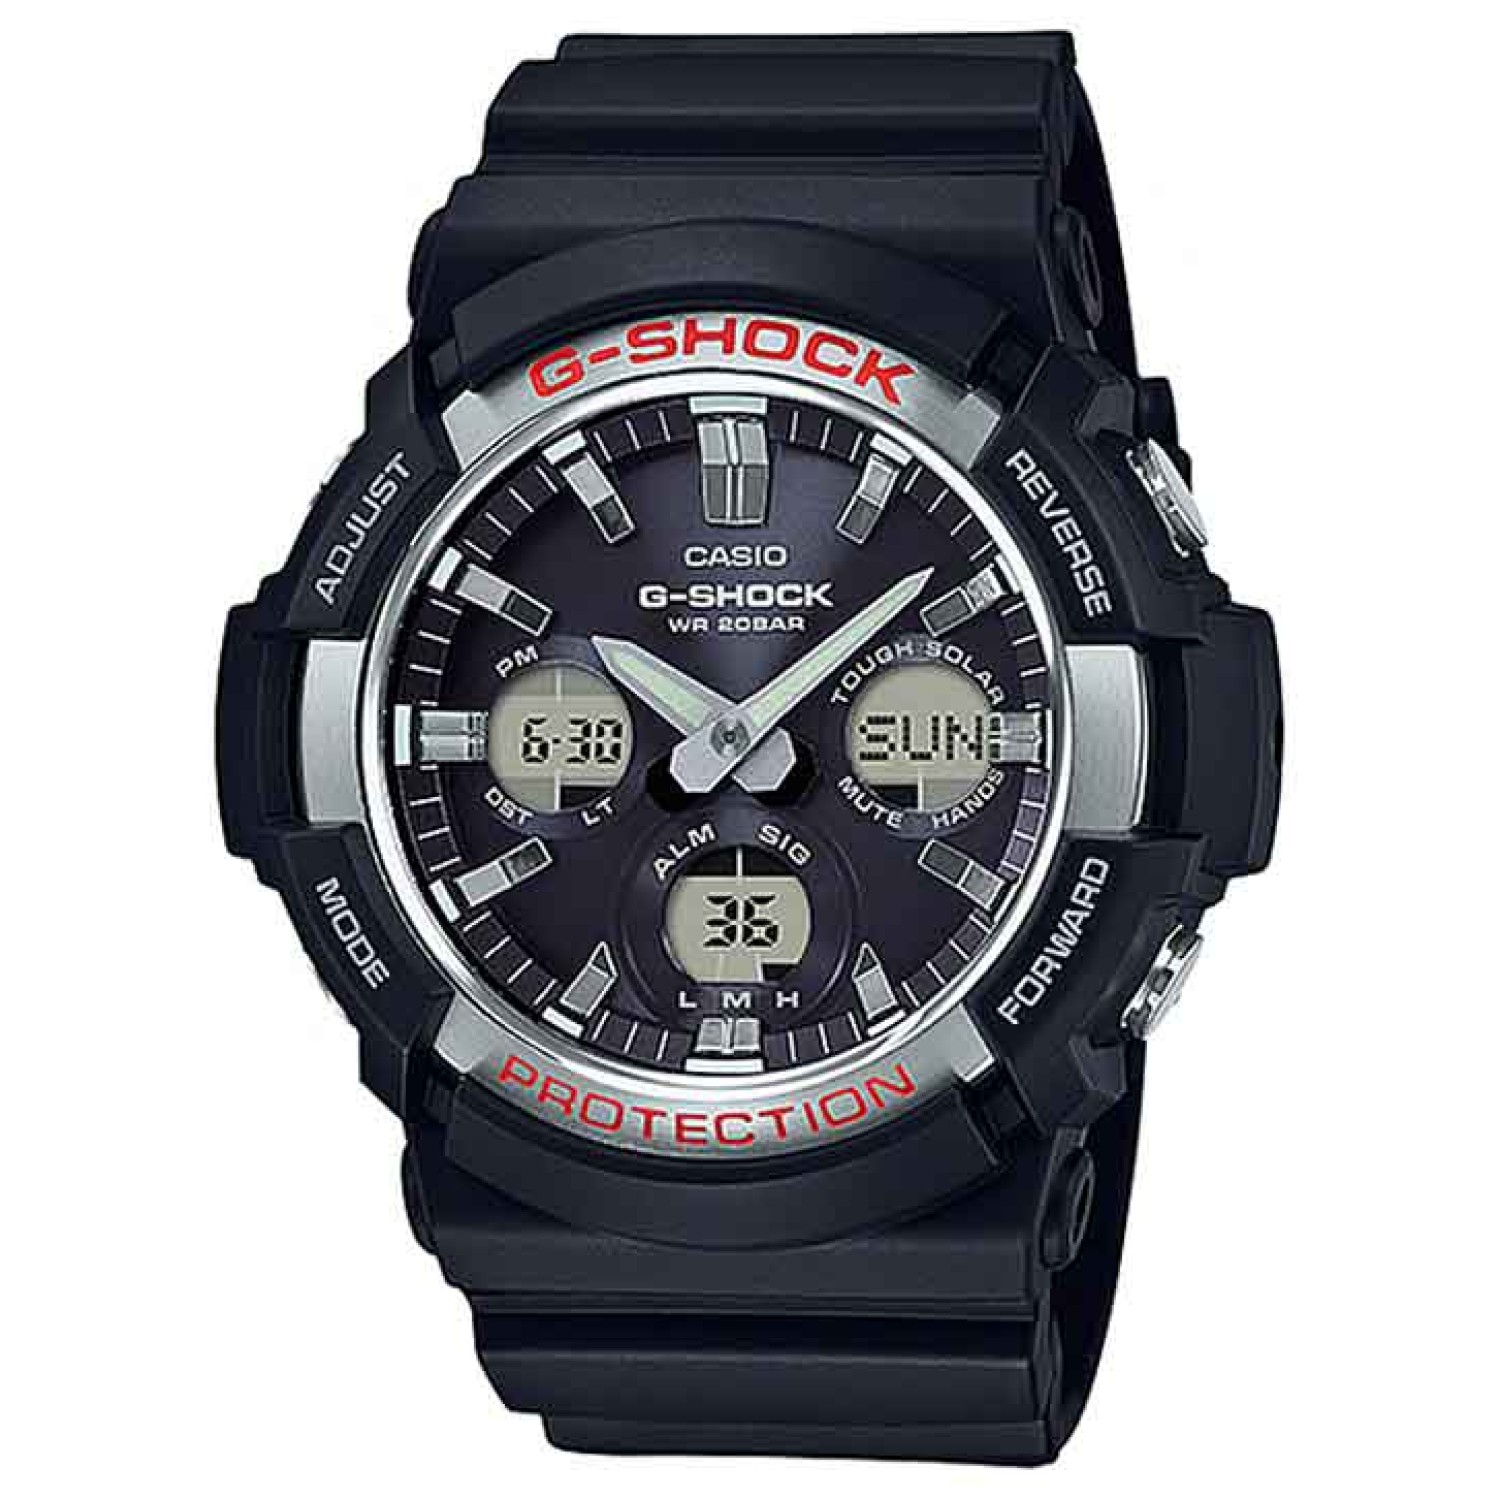 GAS100-1A G-Shock Analog Digital Watch. From G-SHOCK, the watch brand that is constantly setting new standards for timekeeping toughness, come new models based on the big case Tough Solar GAS-100. Variations on a basic black design are created by three di